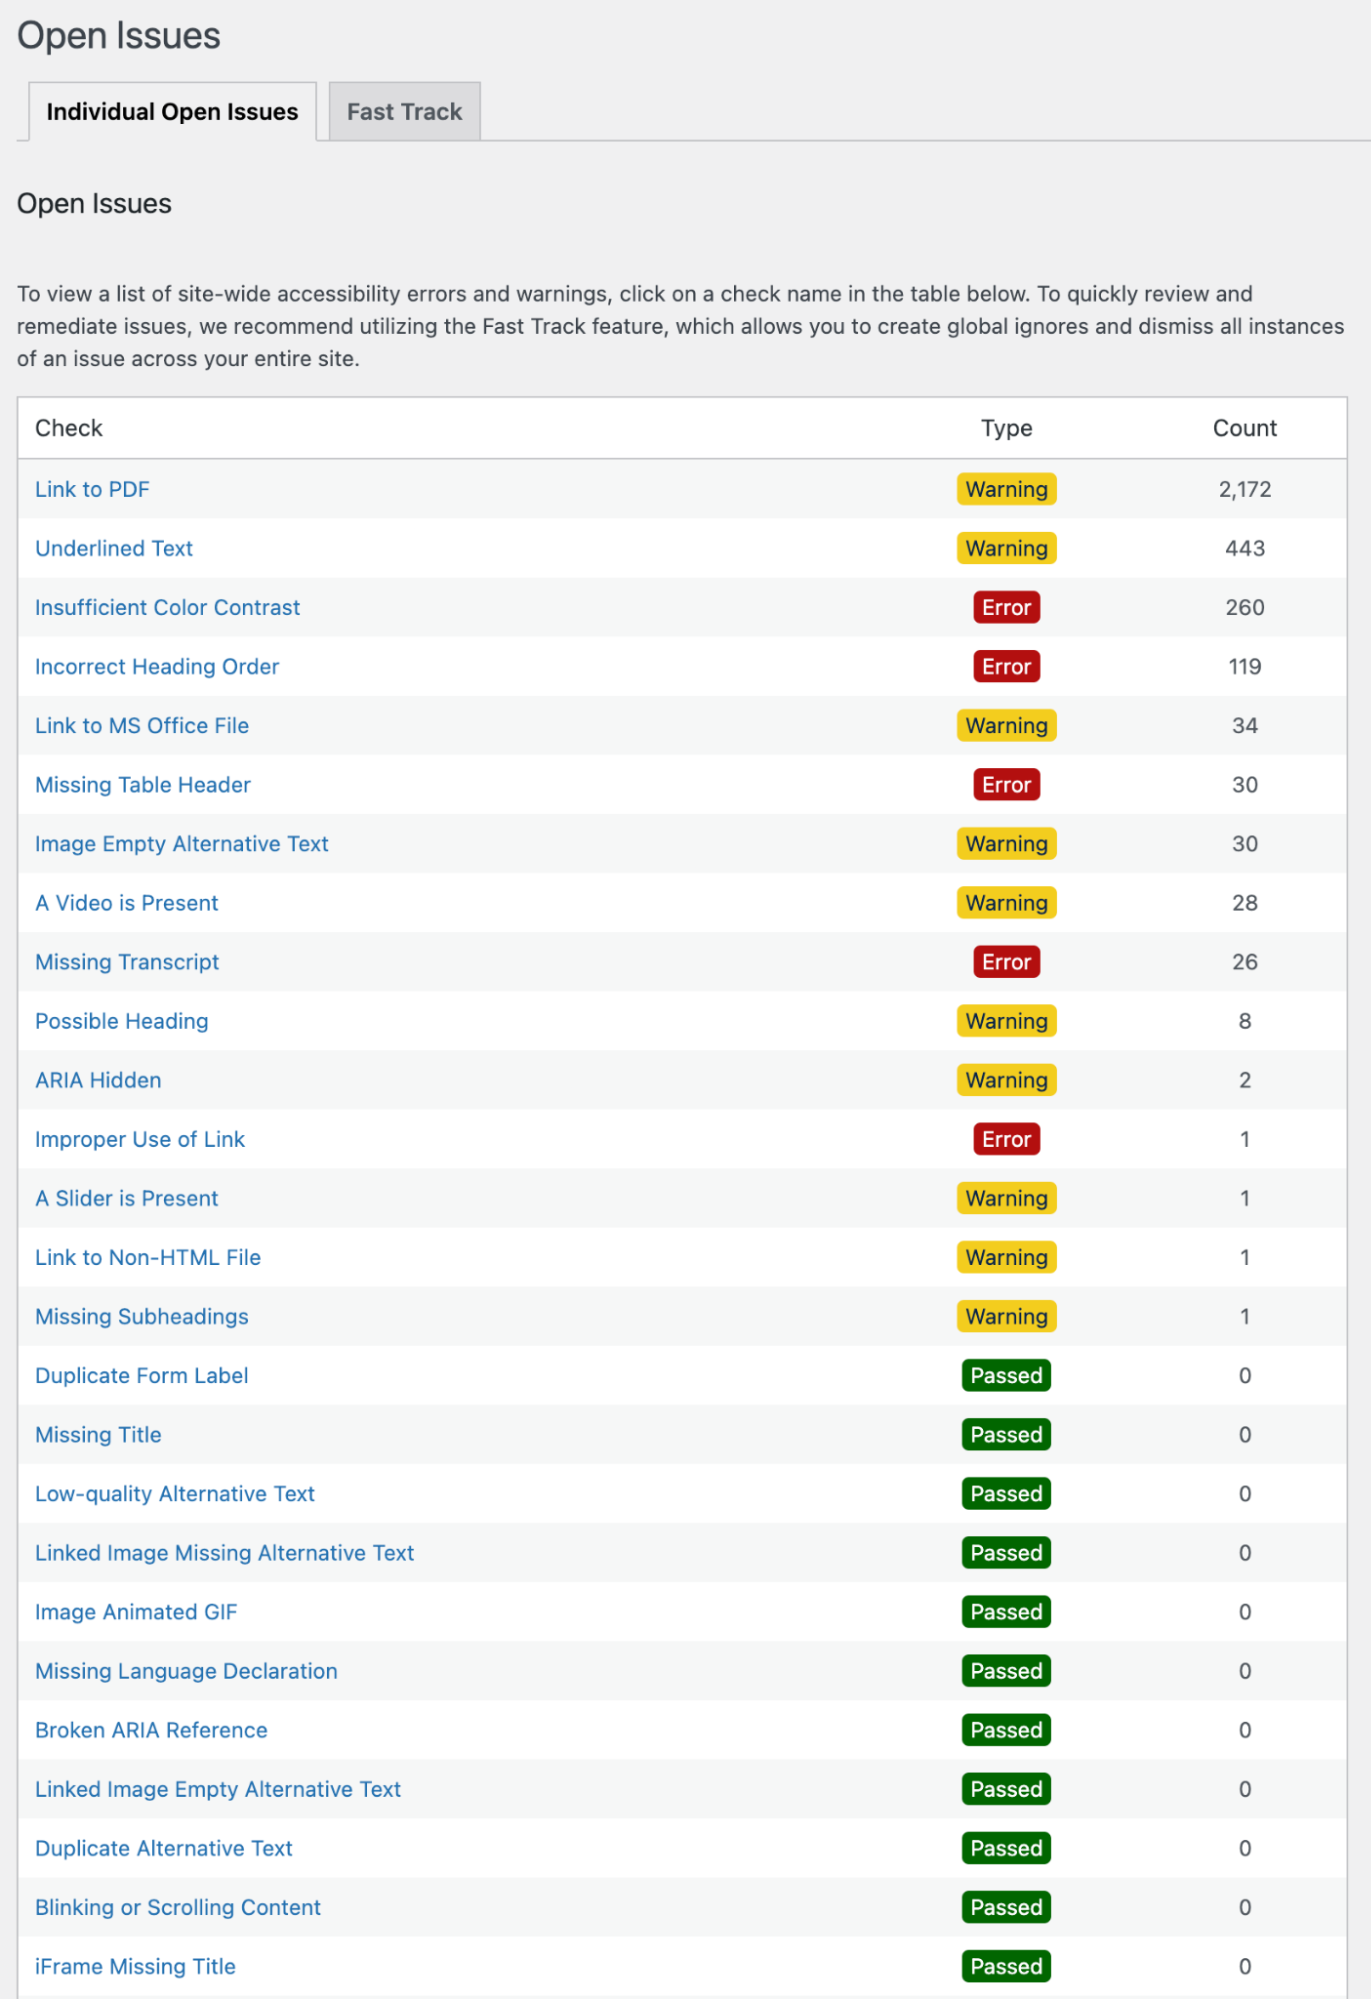 Open Issues Summary page shows status of accessibility problems site-wide. There are more than 40 checks in a table with columns for type (error or warning) and count.